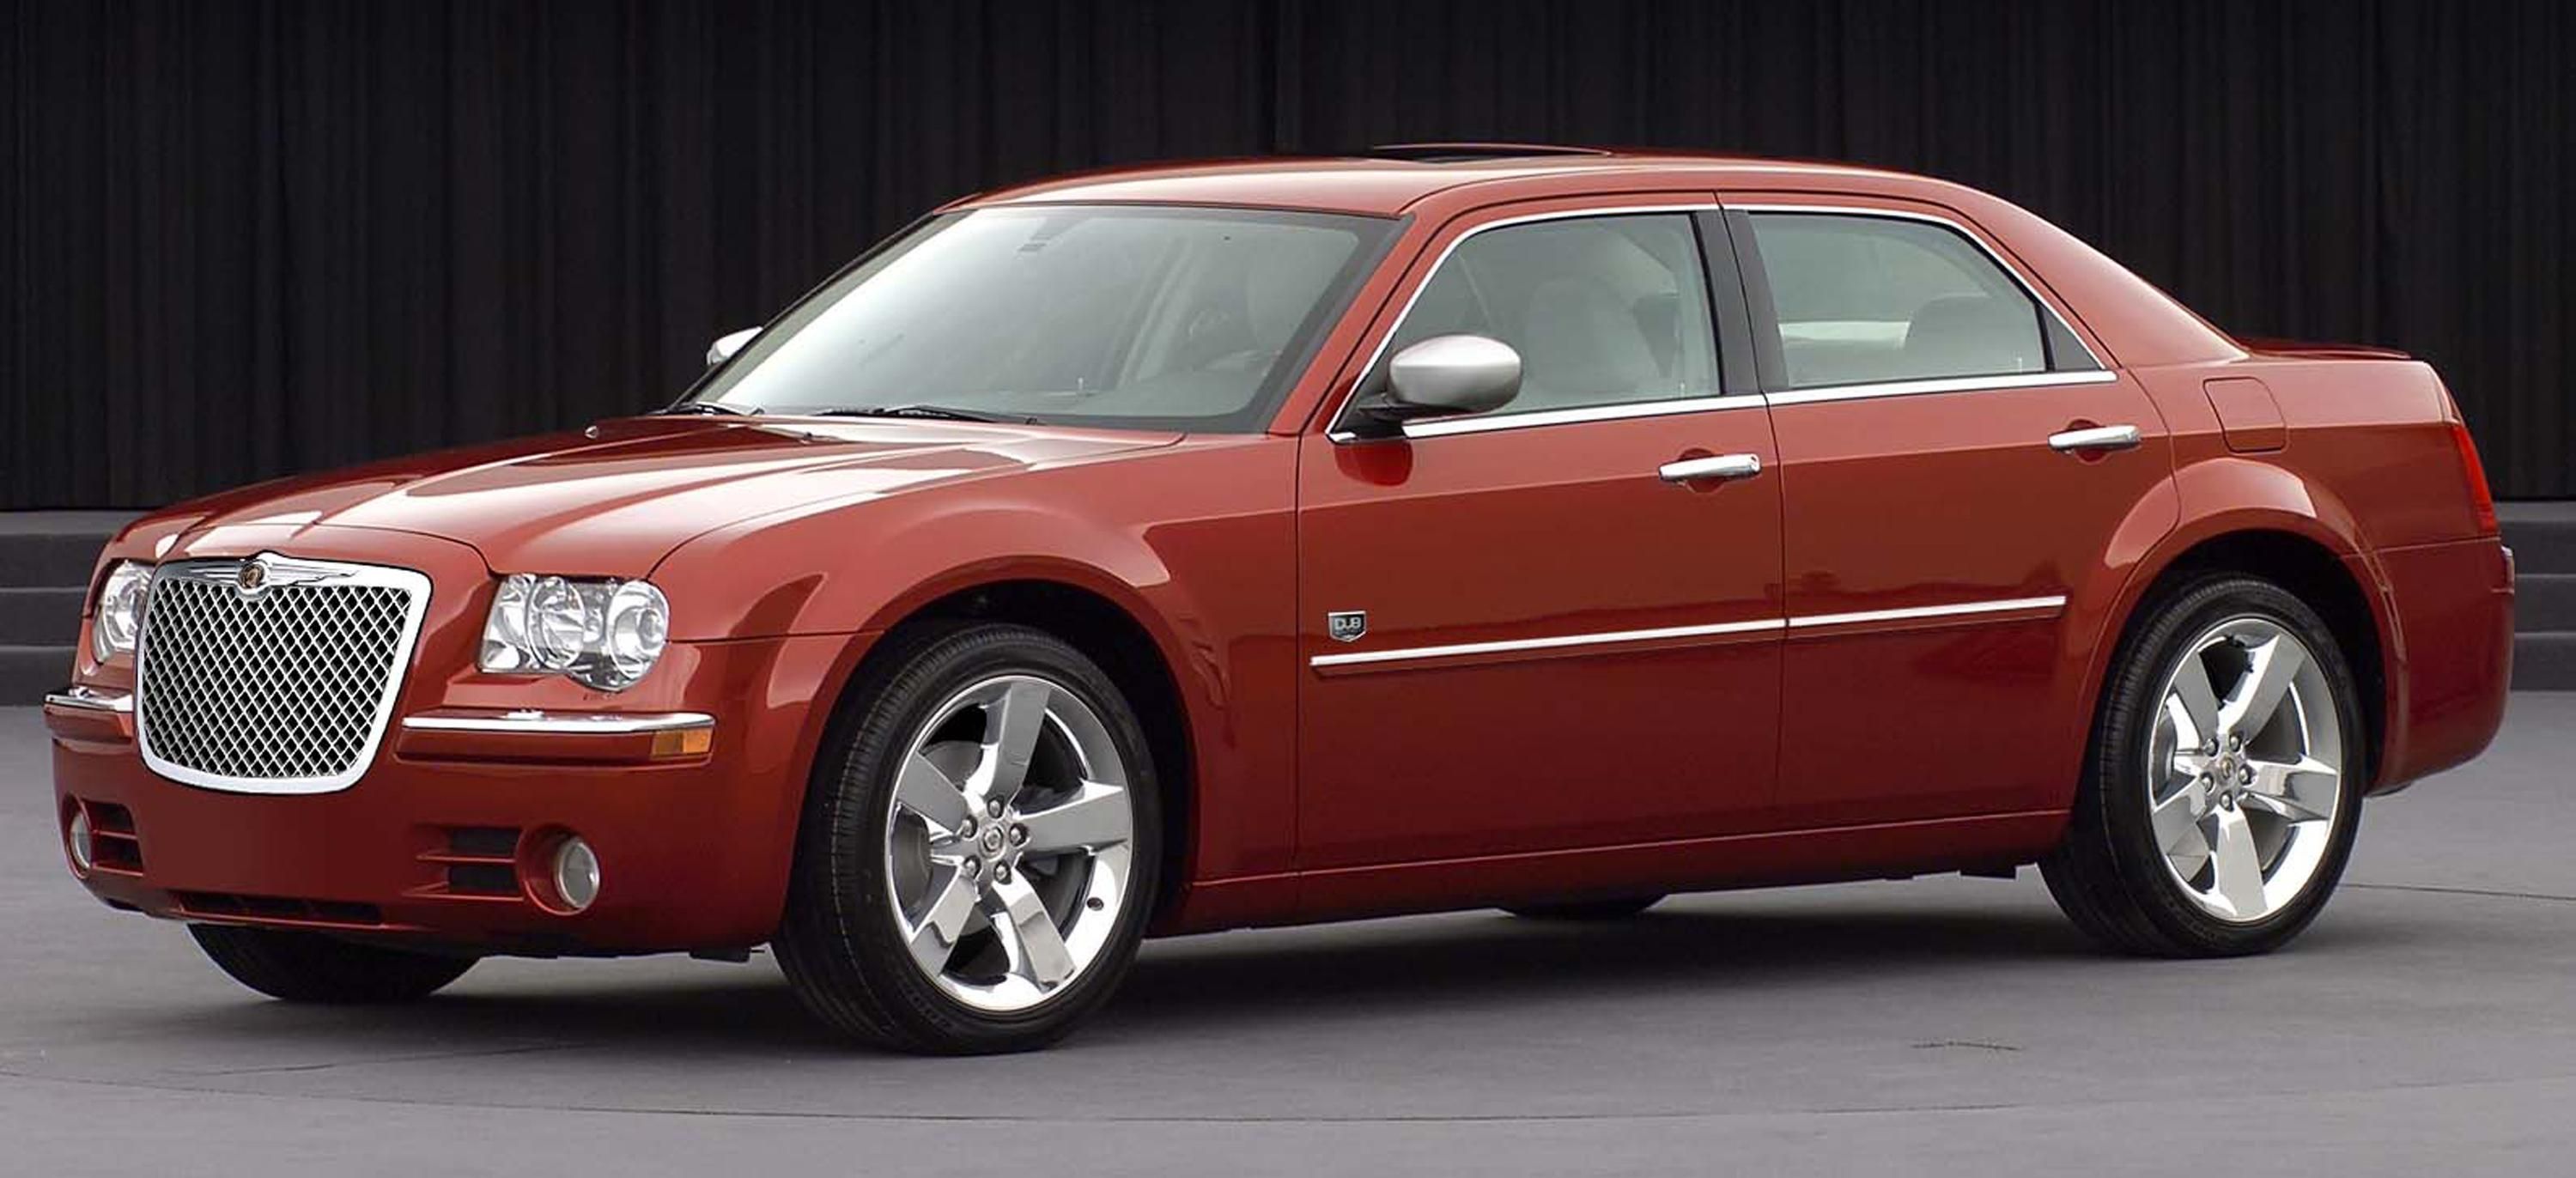 2008 Chrysler 300 and Dodge Charger DUB Edition